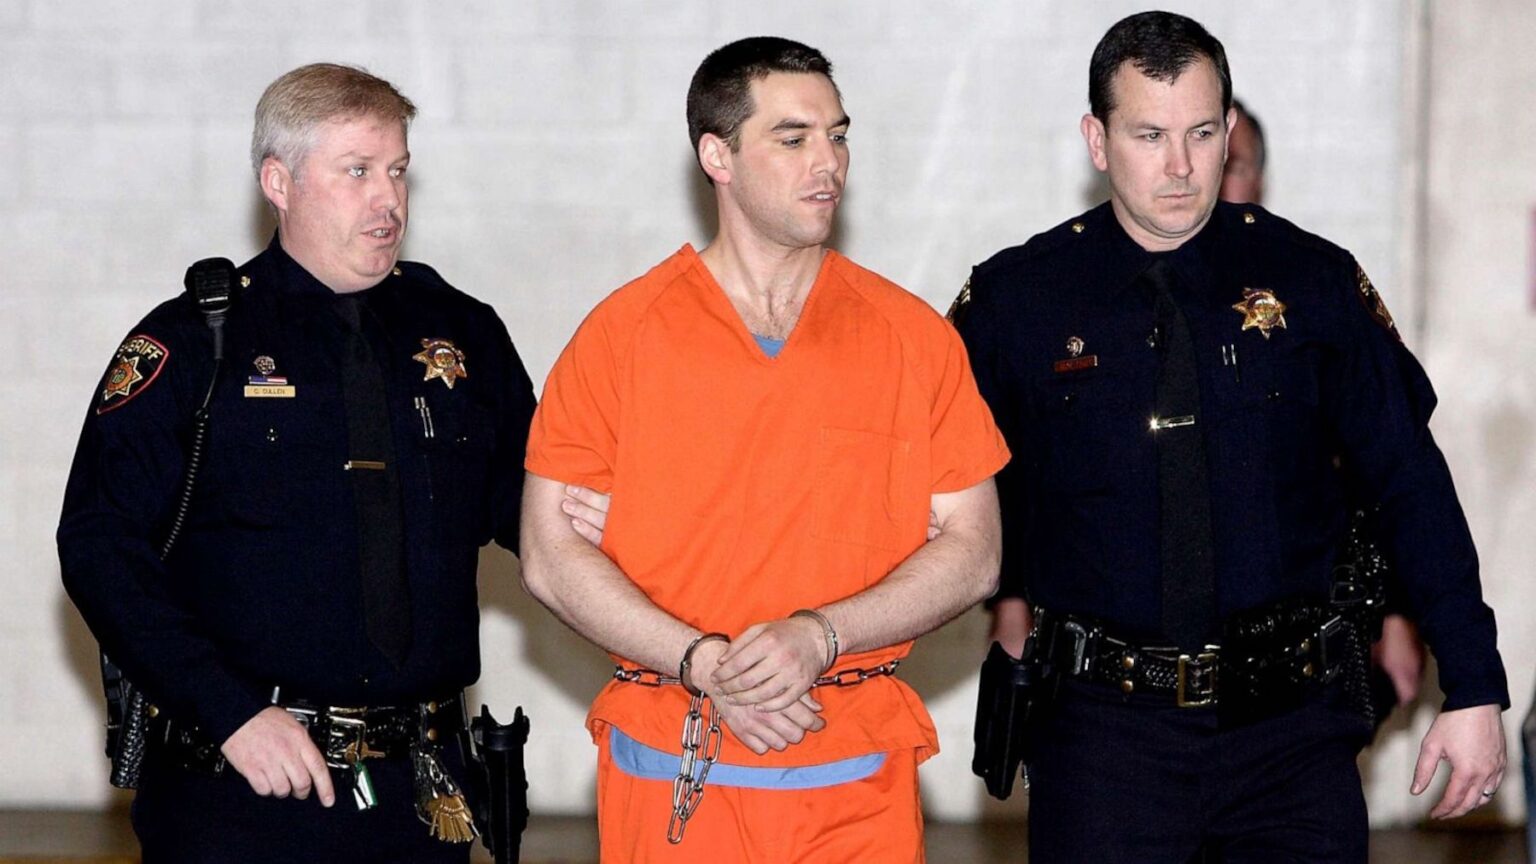 If you’re familiar with the Scott Peterson case, you know it’s been a long ordeal with many surprising twists and turns. What's happening in 2020?